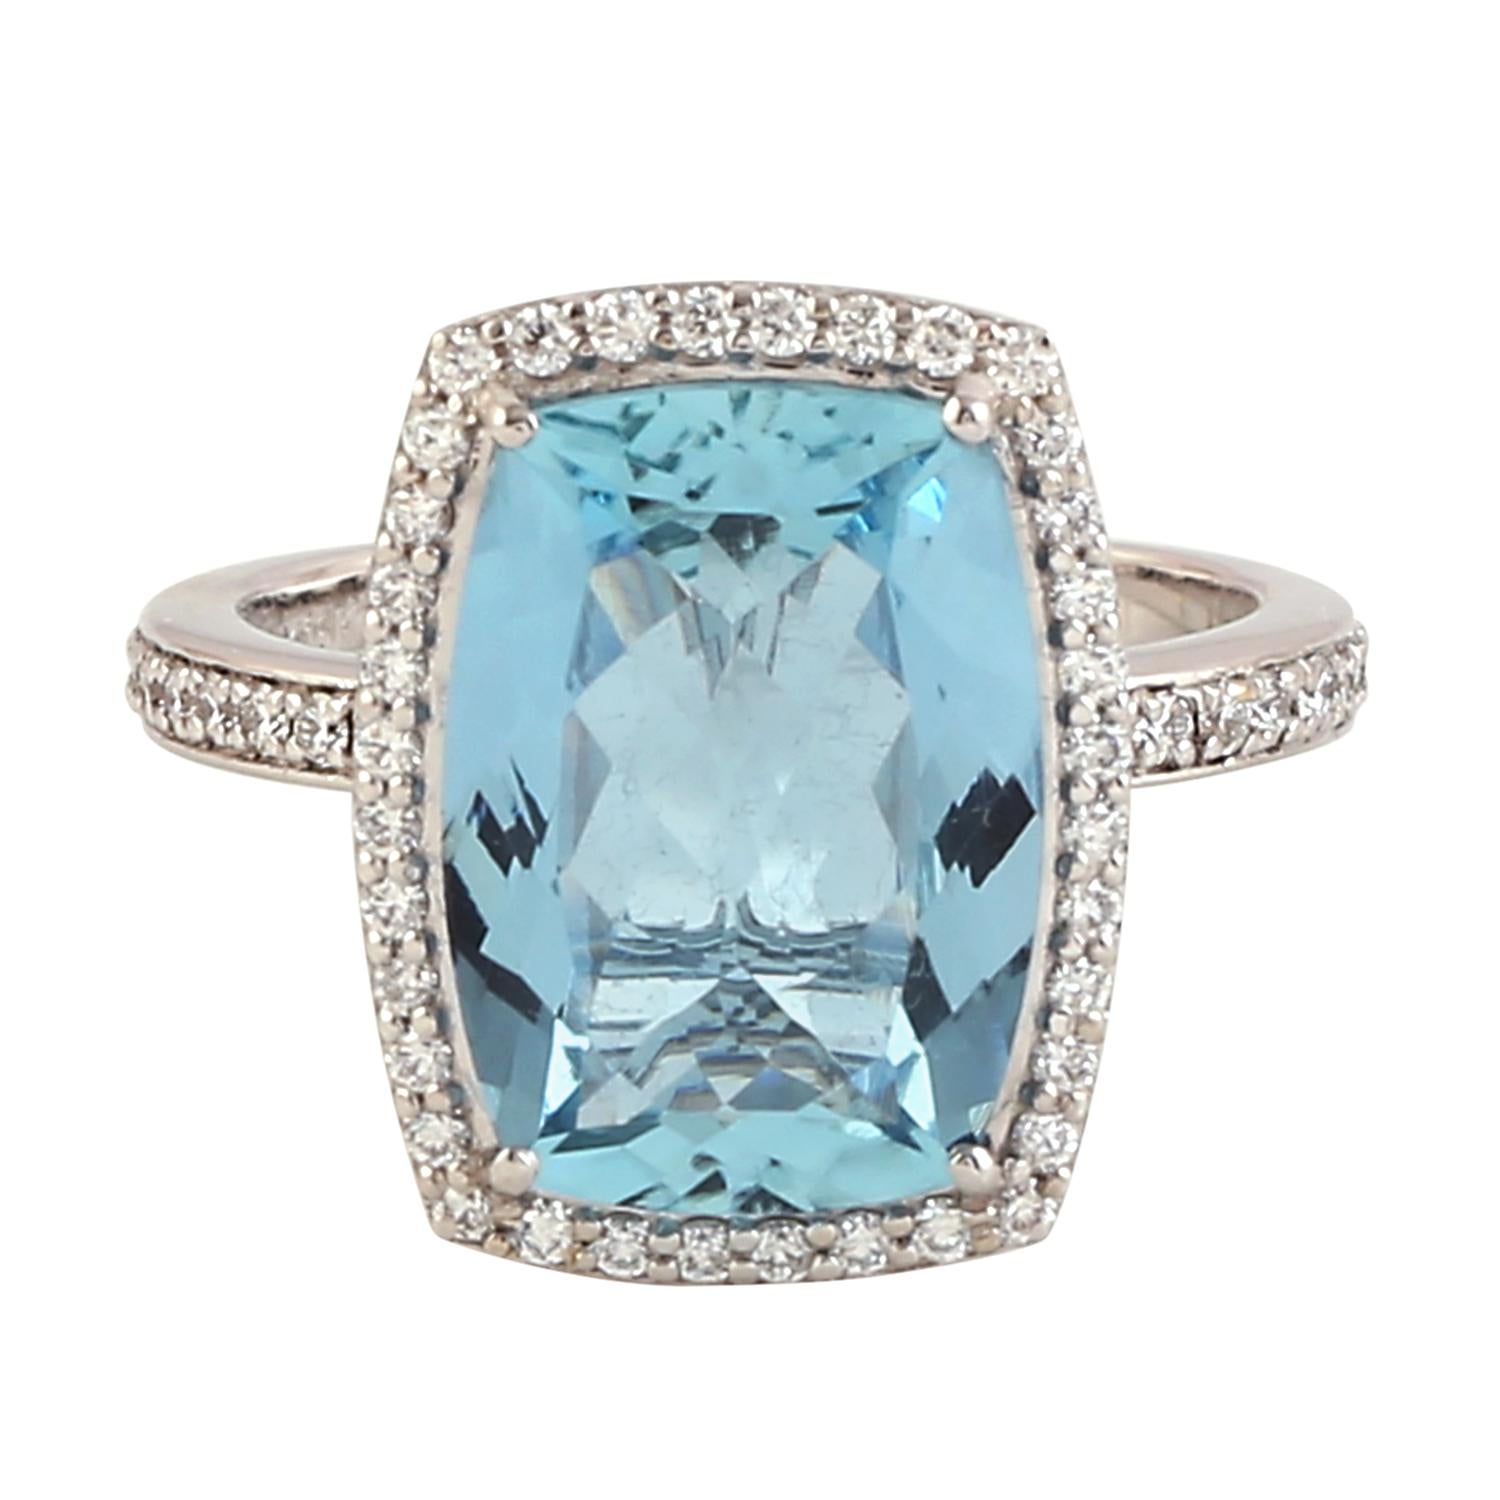 Classic cushion Shape Aquamarine Cocktail Solitaire Ring with Diamonds in 18k Gold White Gold is such a beauty for any occasion from day to night.


18KT: 7.050gms
Diamond: 0.49cts
Aquamarine: 5.39cts